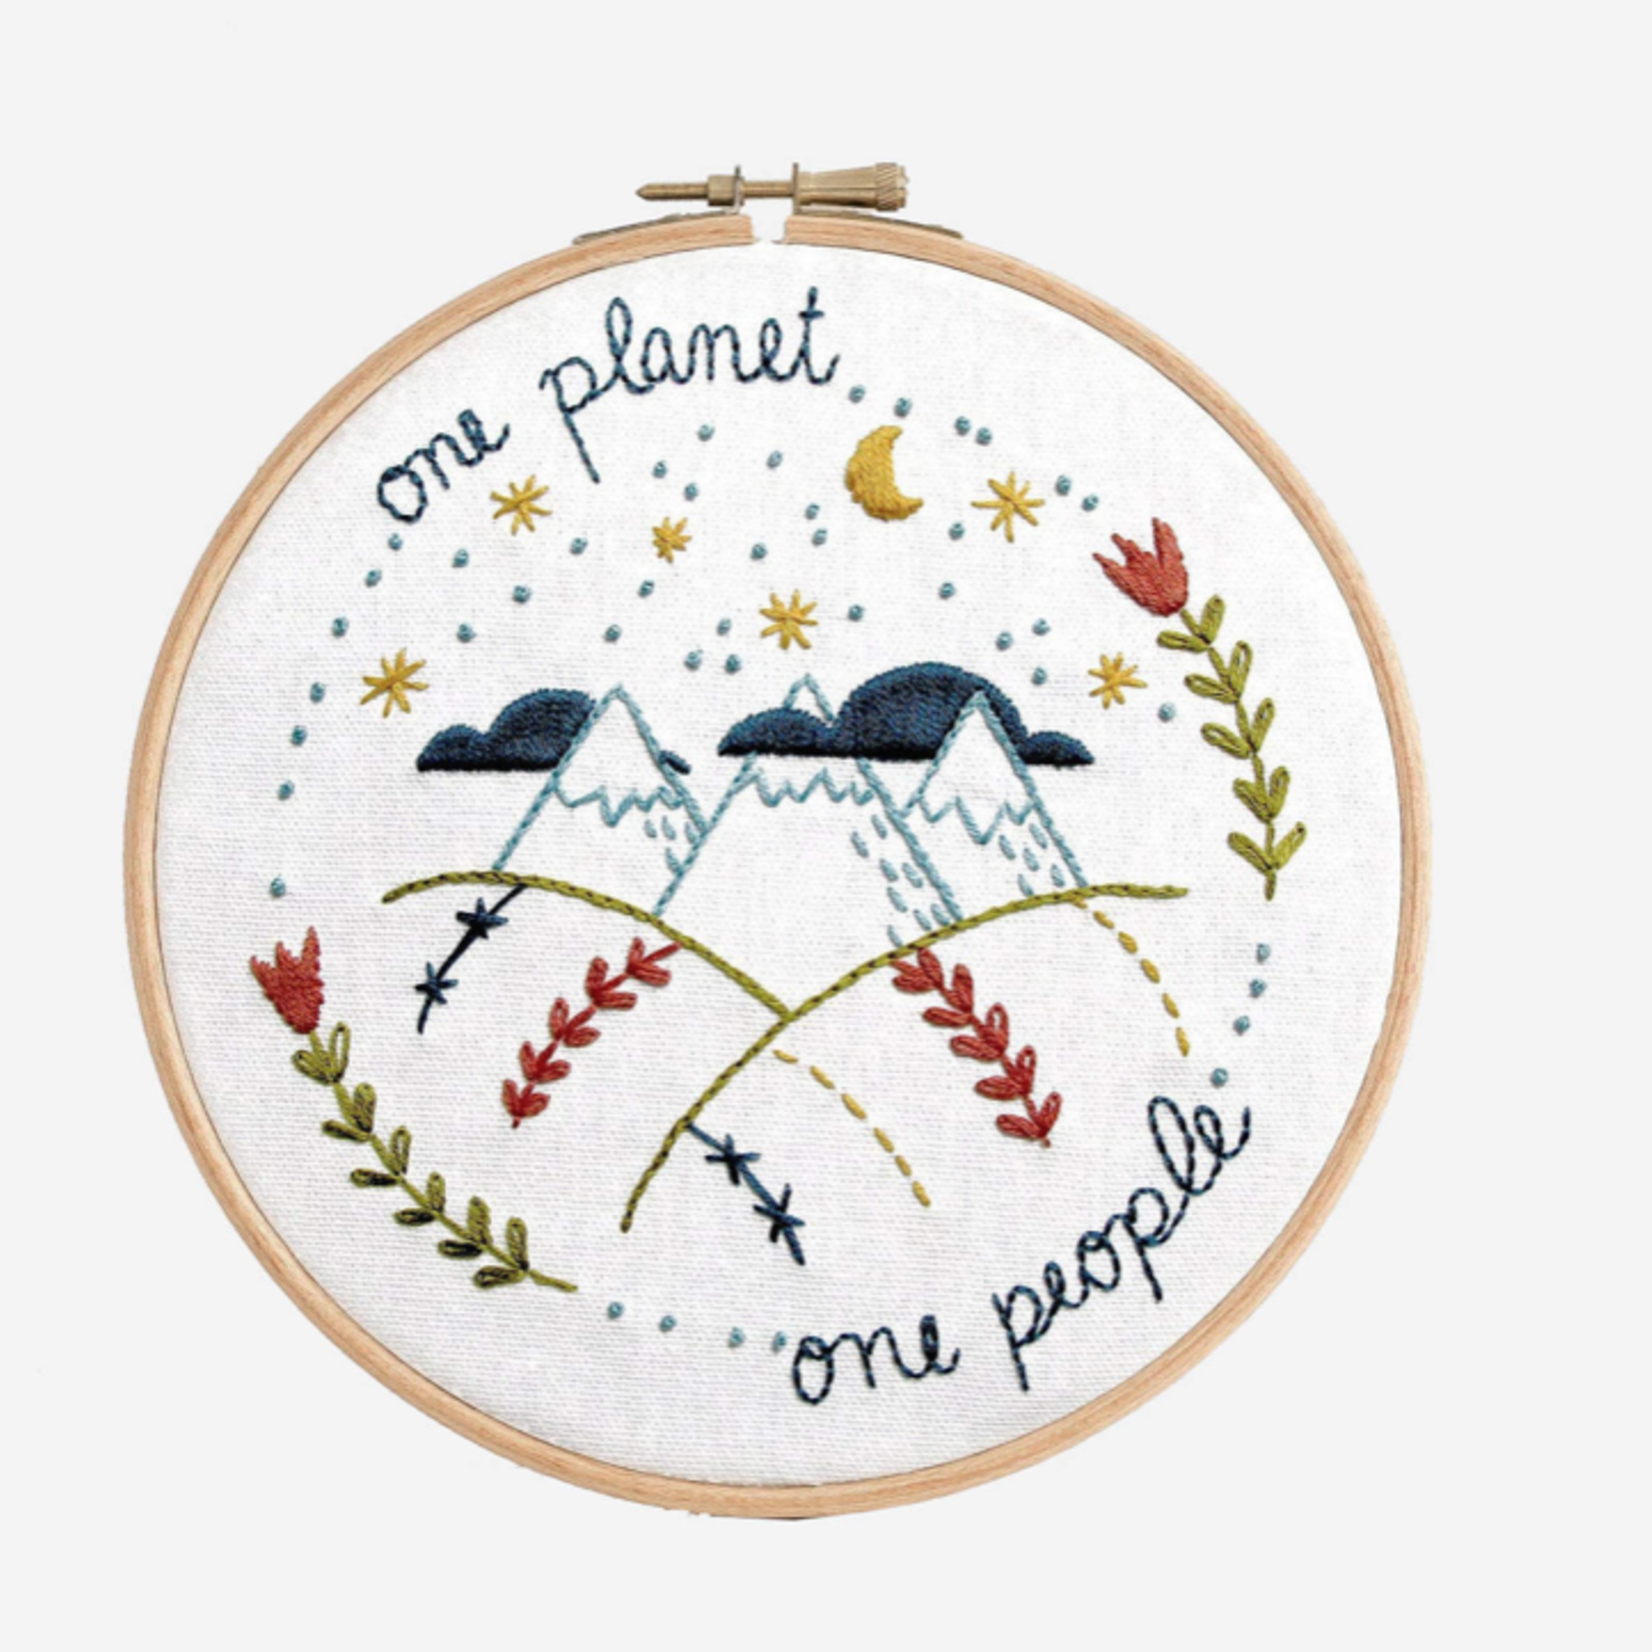 One Planet One People Embroidery Kit